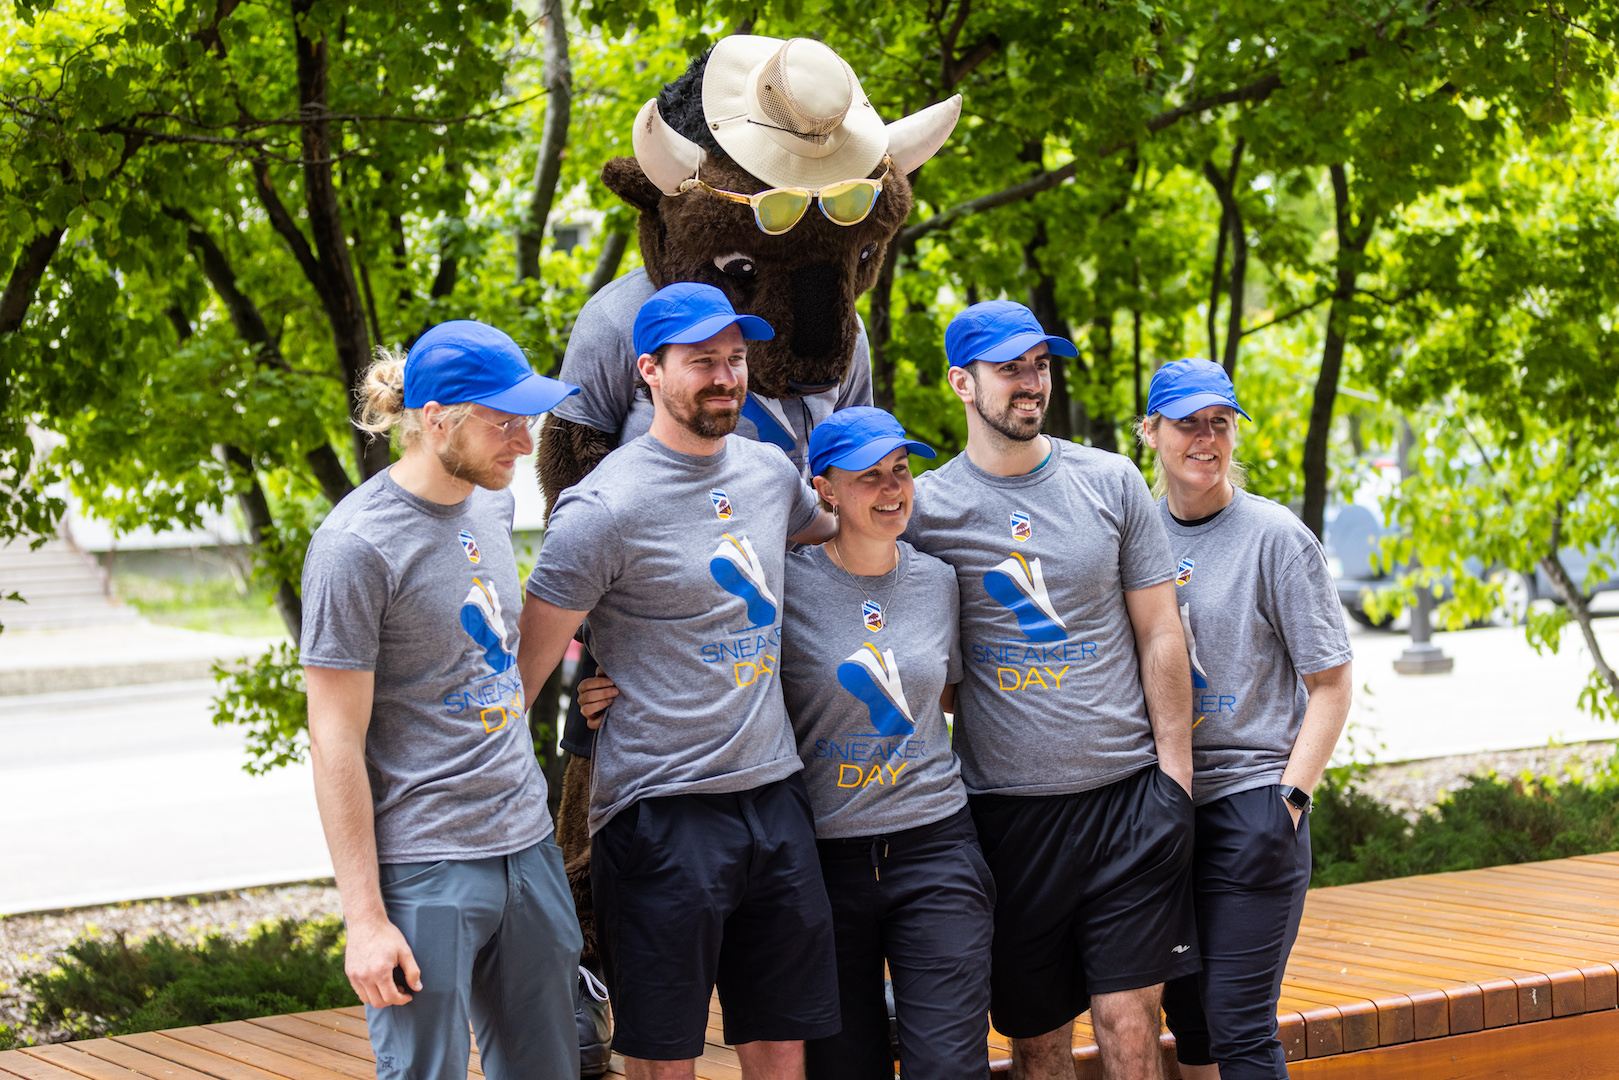 Billy the Bison poses with some people wearing Sneaker Day T-shirts.